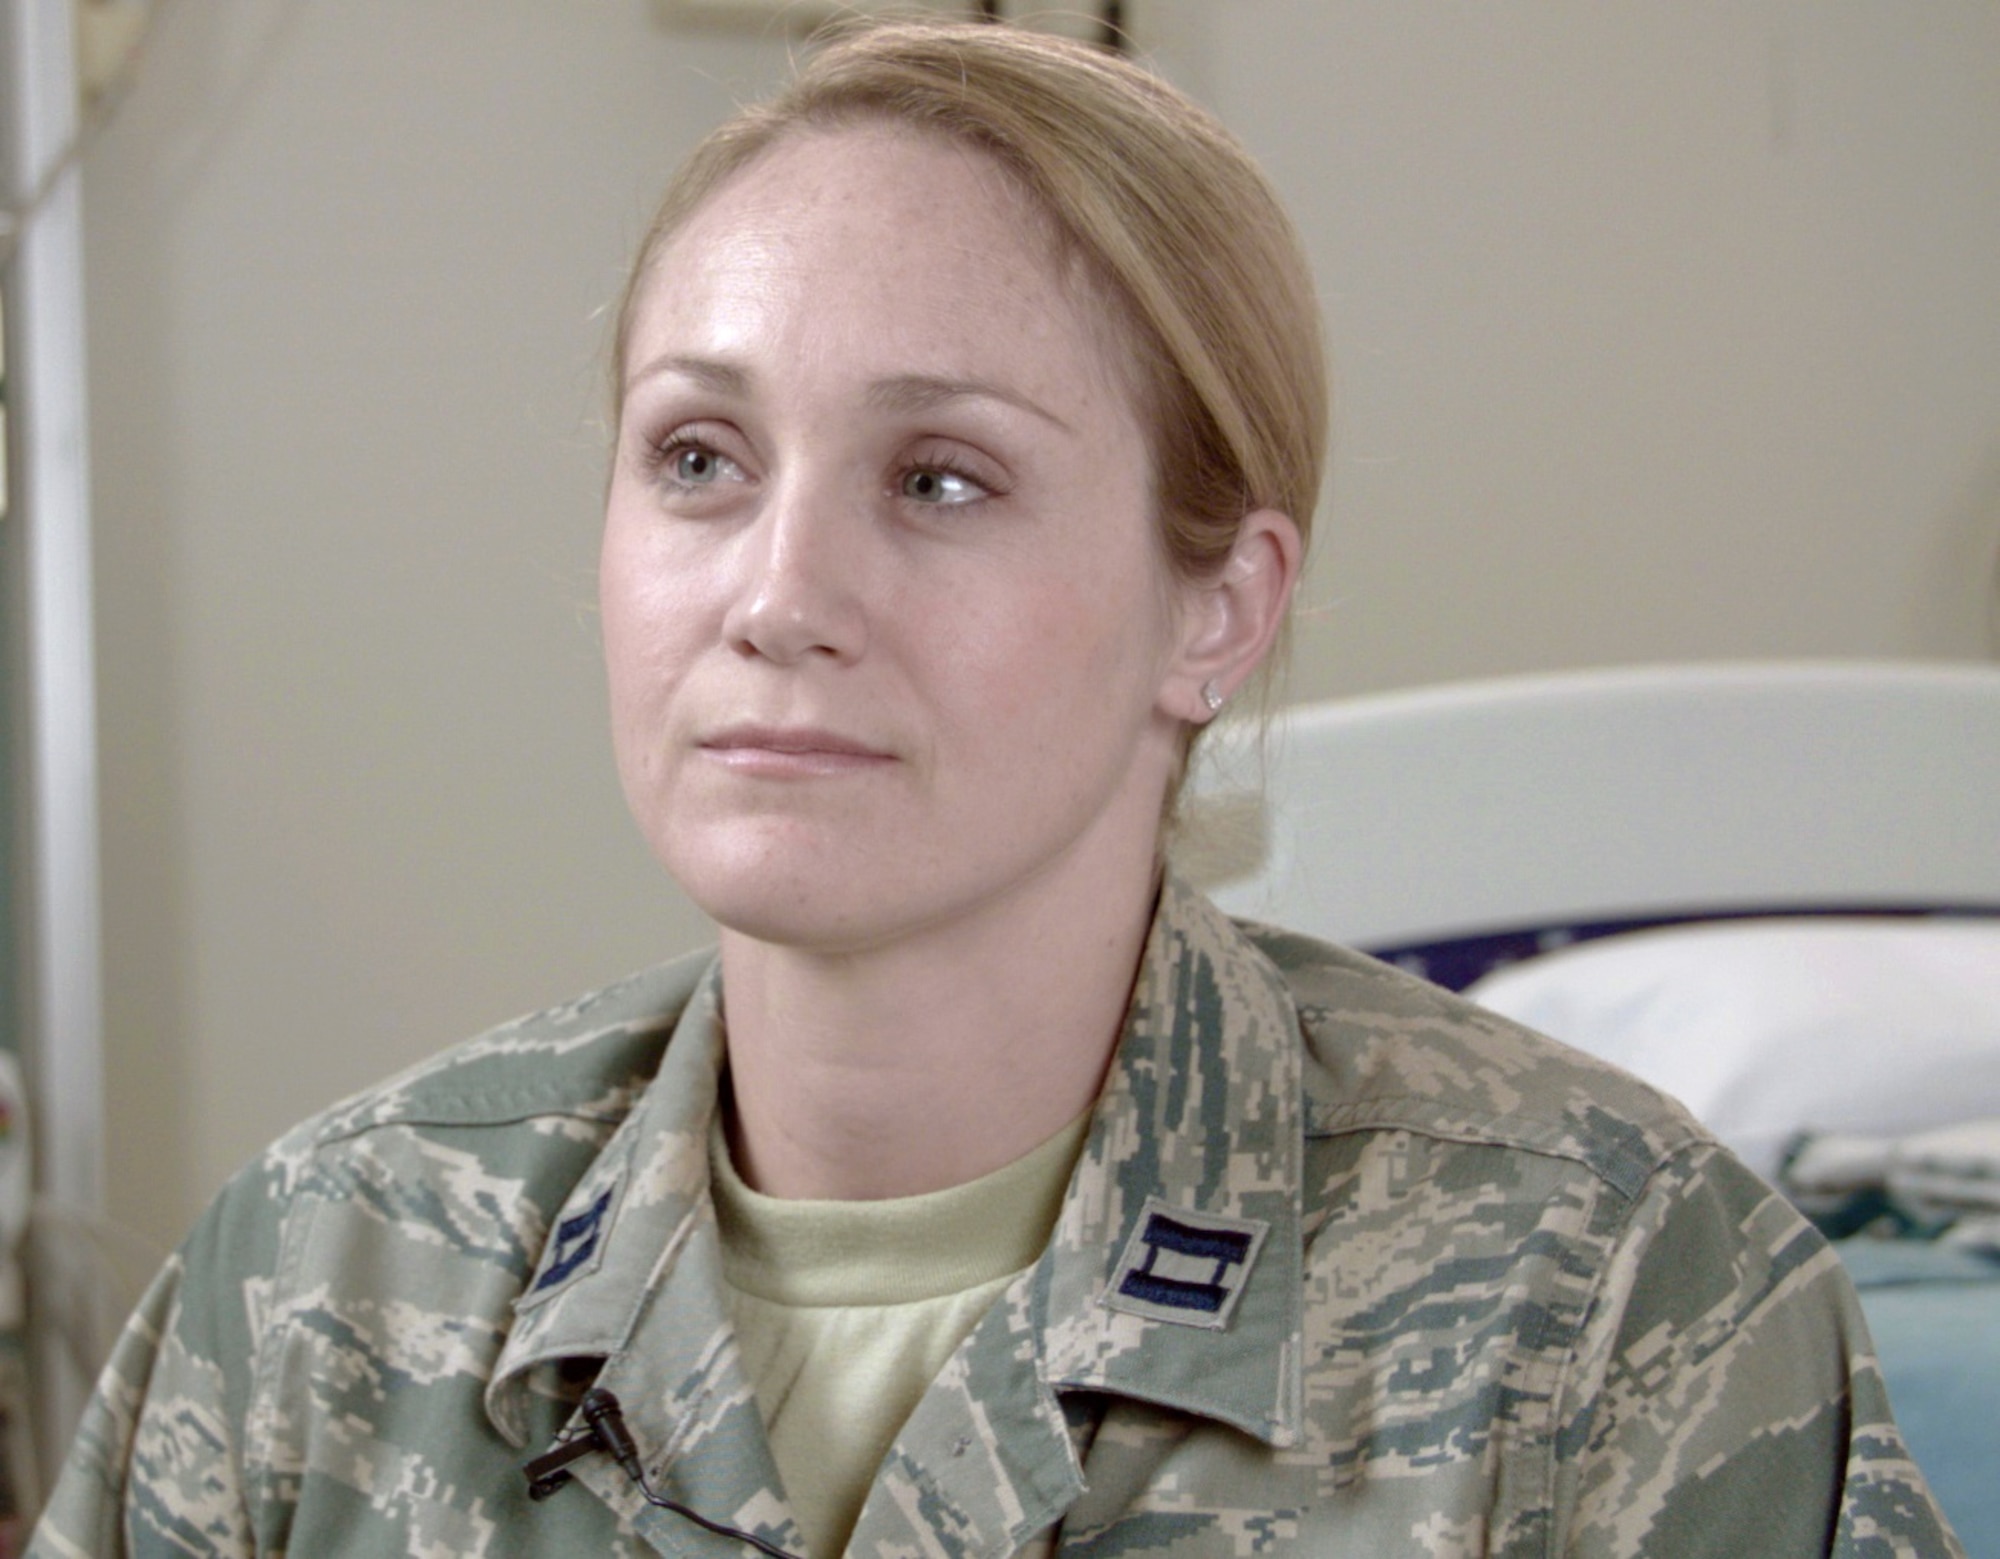 Air Force Capt. (Dr.) Lauren Lee, hematology/oncology fellow at Brooke Army Medical Center, reflects on the care BAMC staff members provided Alexis Piper, a patient with sickle cell anemia, who nearly died from a rare condition called hyperhemolysis. Hyperhemolysis syndrome is a potentially fatal transfusion complication. Many BAMC staff members collaborated to find a treatment for the life-threatening condition. (U.S. Air Force photo by Corey Toye)